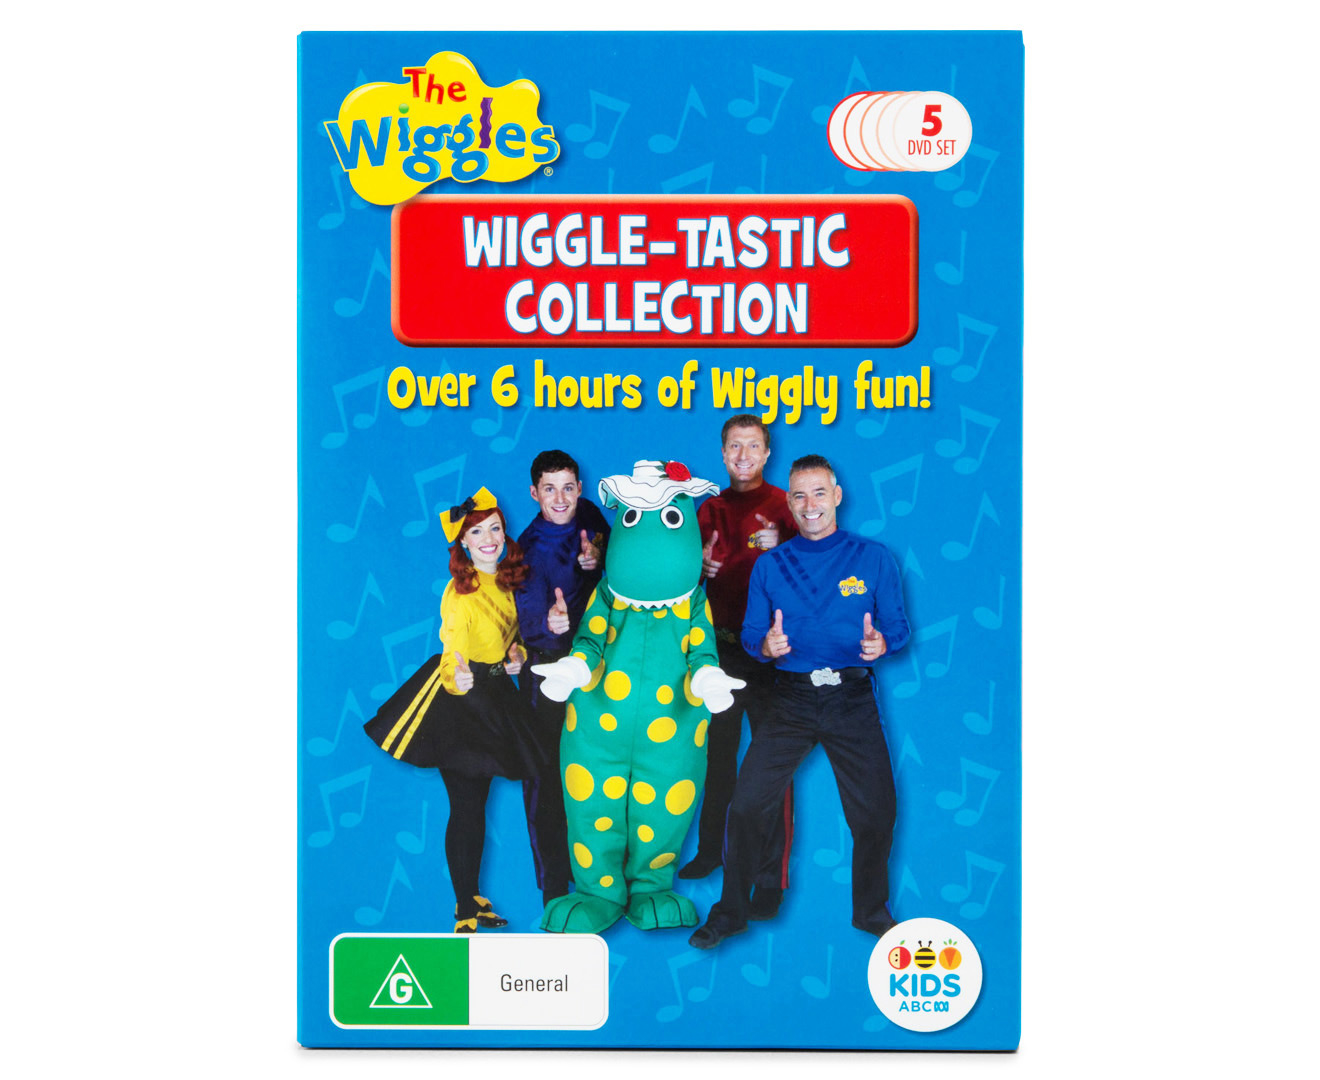 The Wiggles Wiggle-Tastic Collection 5-DVD Set